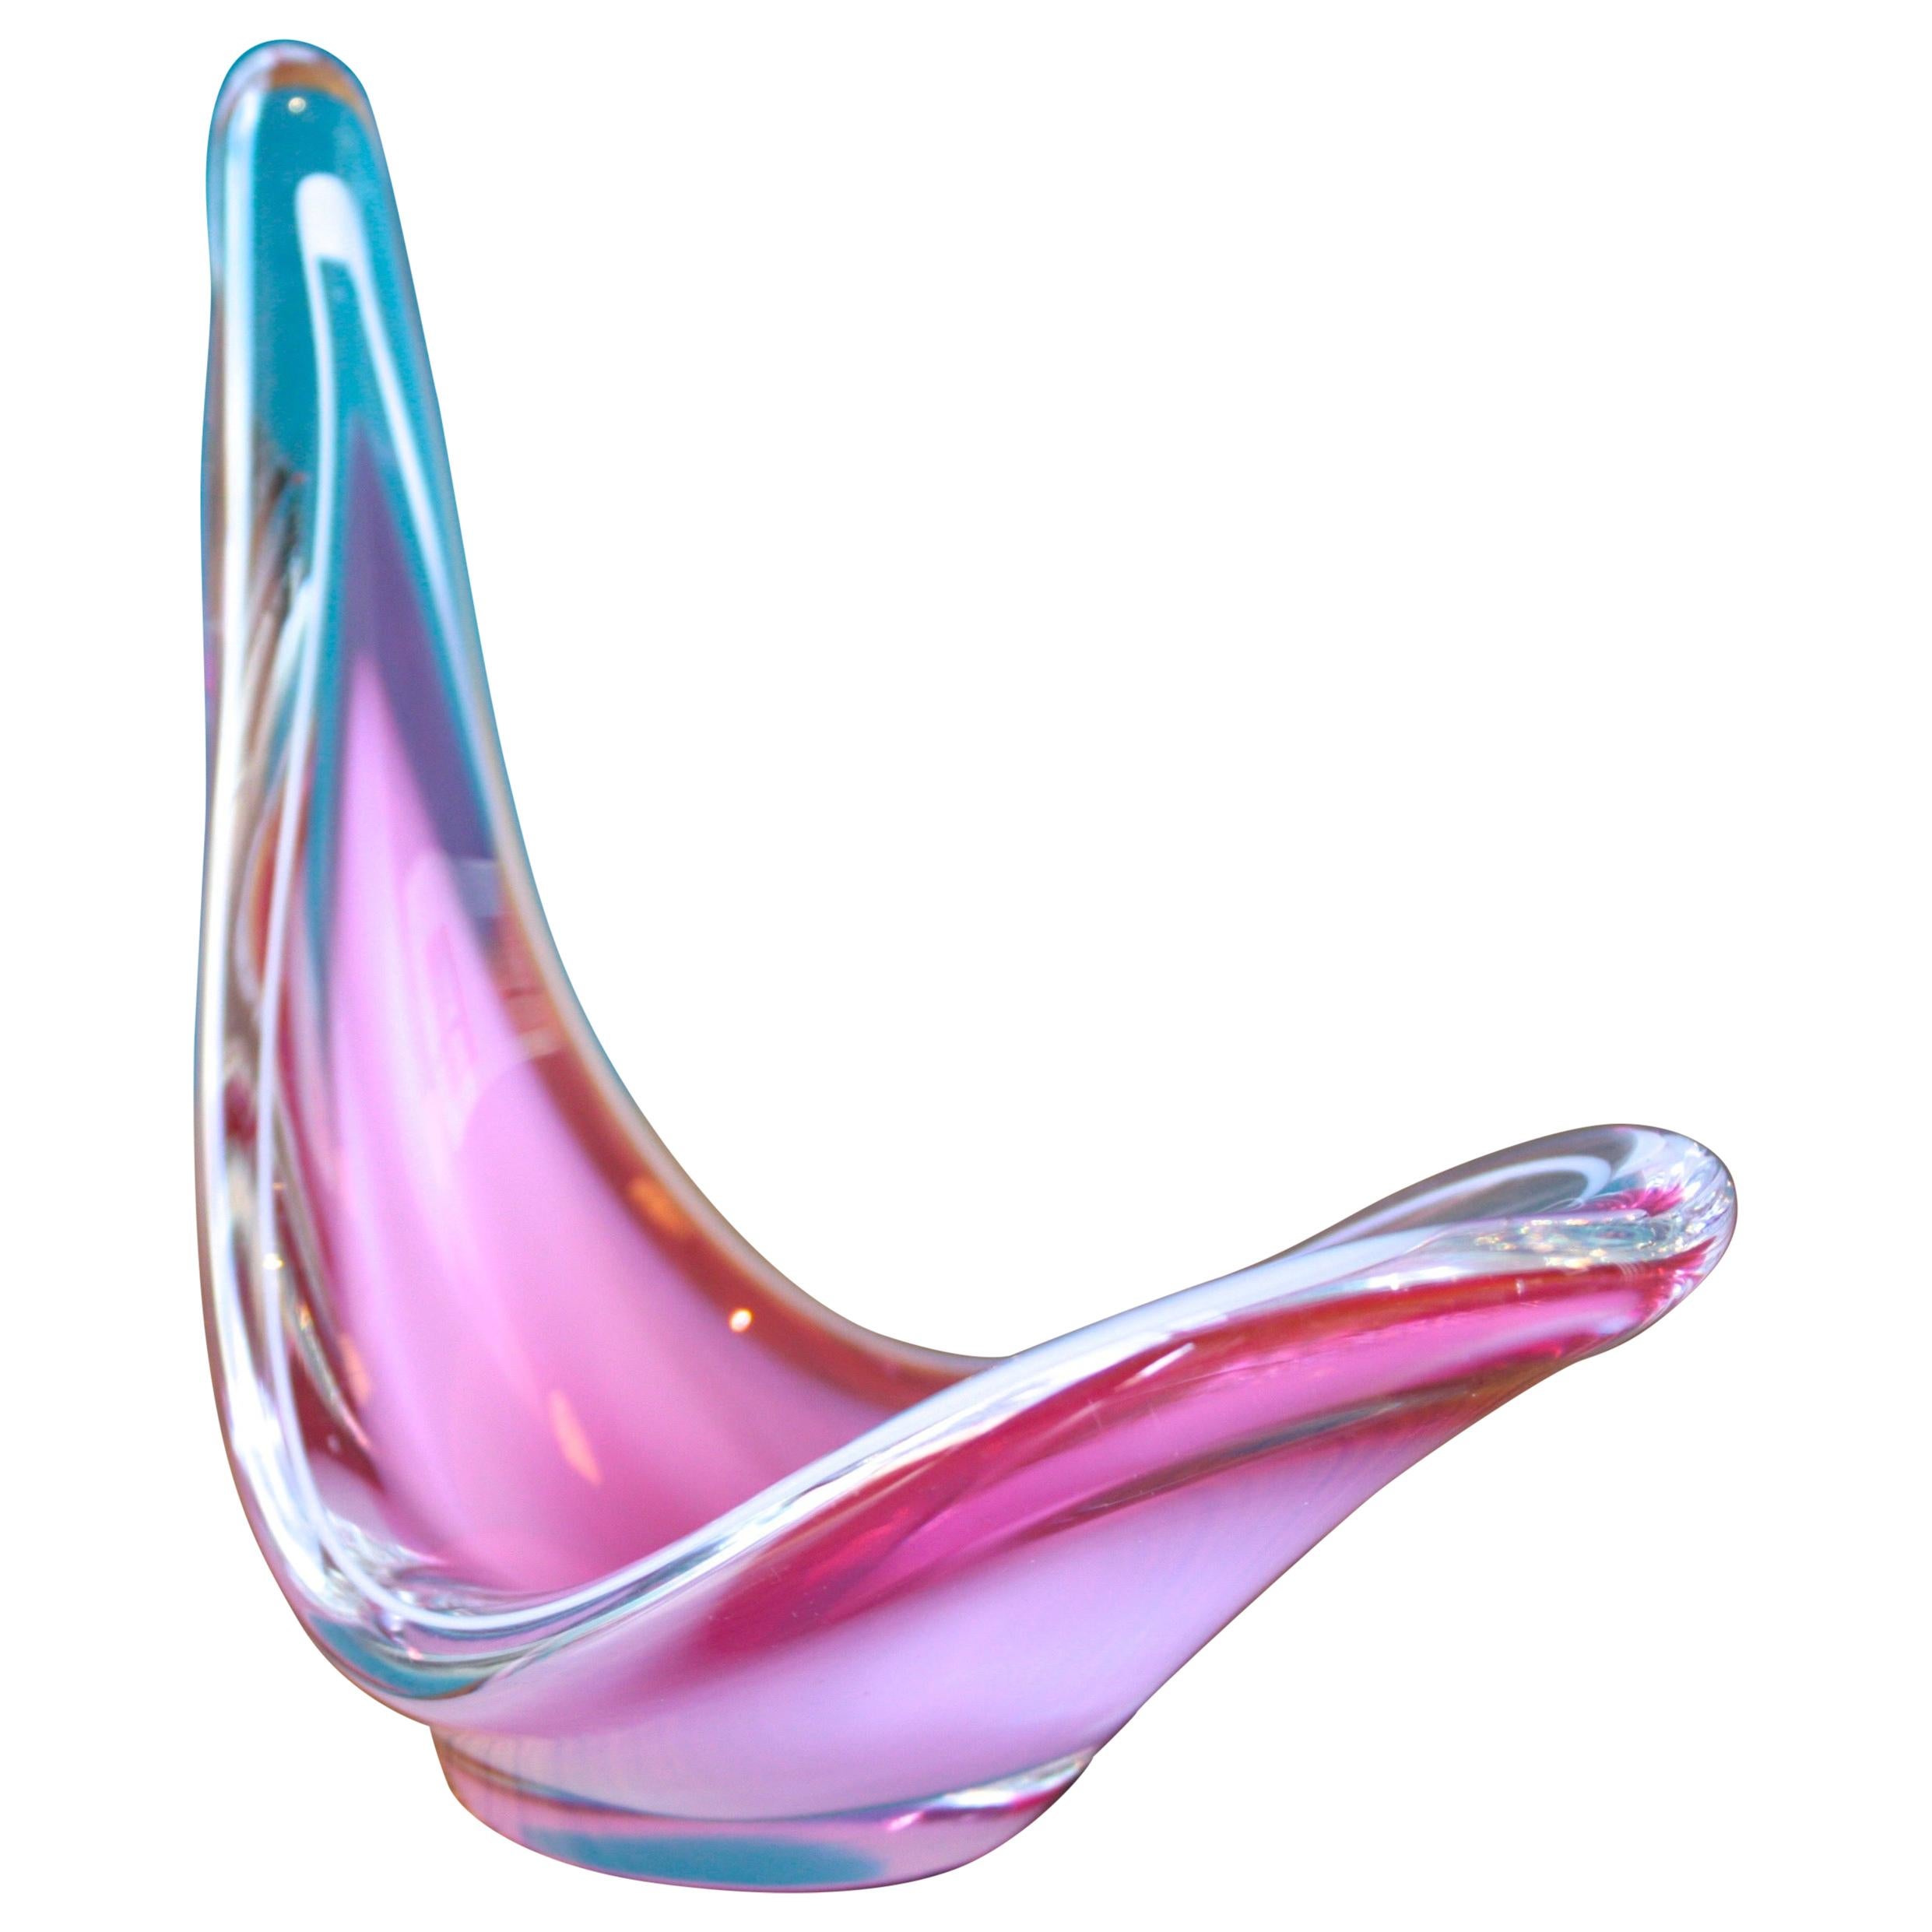 Flygsfors Coquille Glass Object, Designed by Paul Kedelv, Sweden, 1958 For Sale